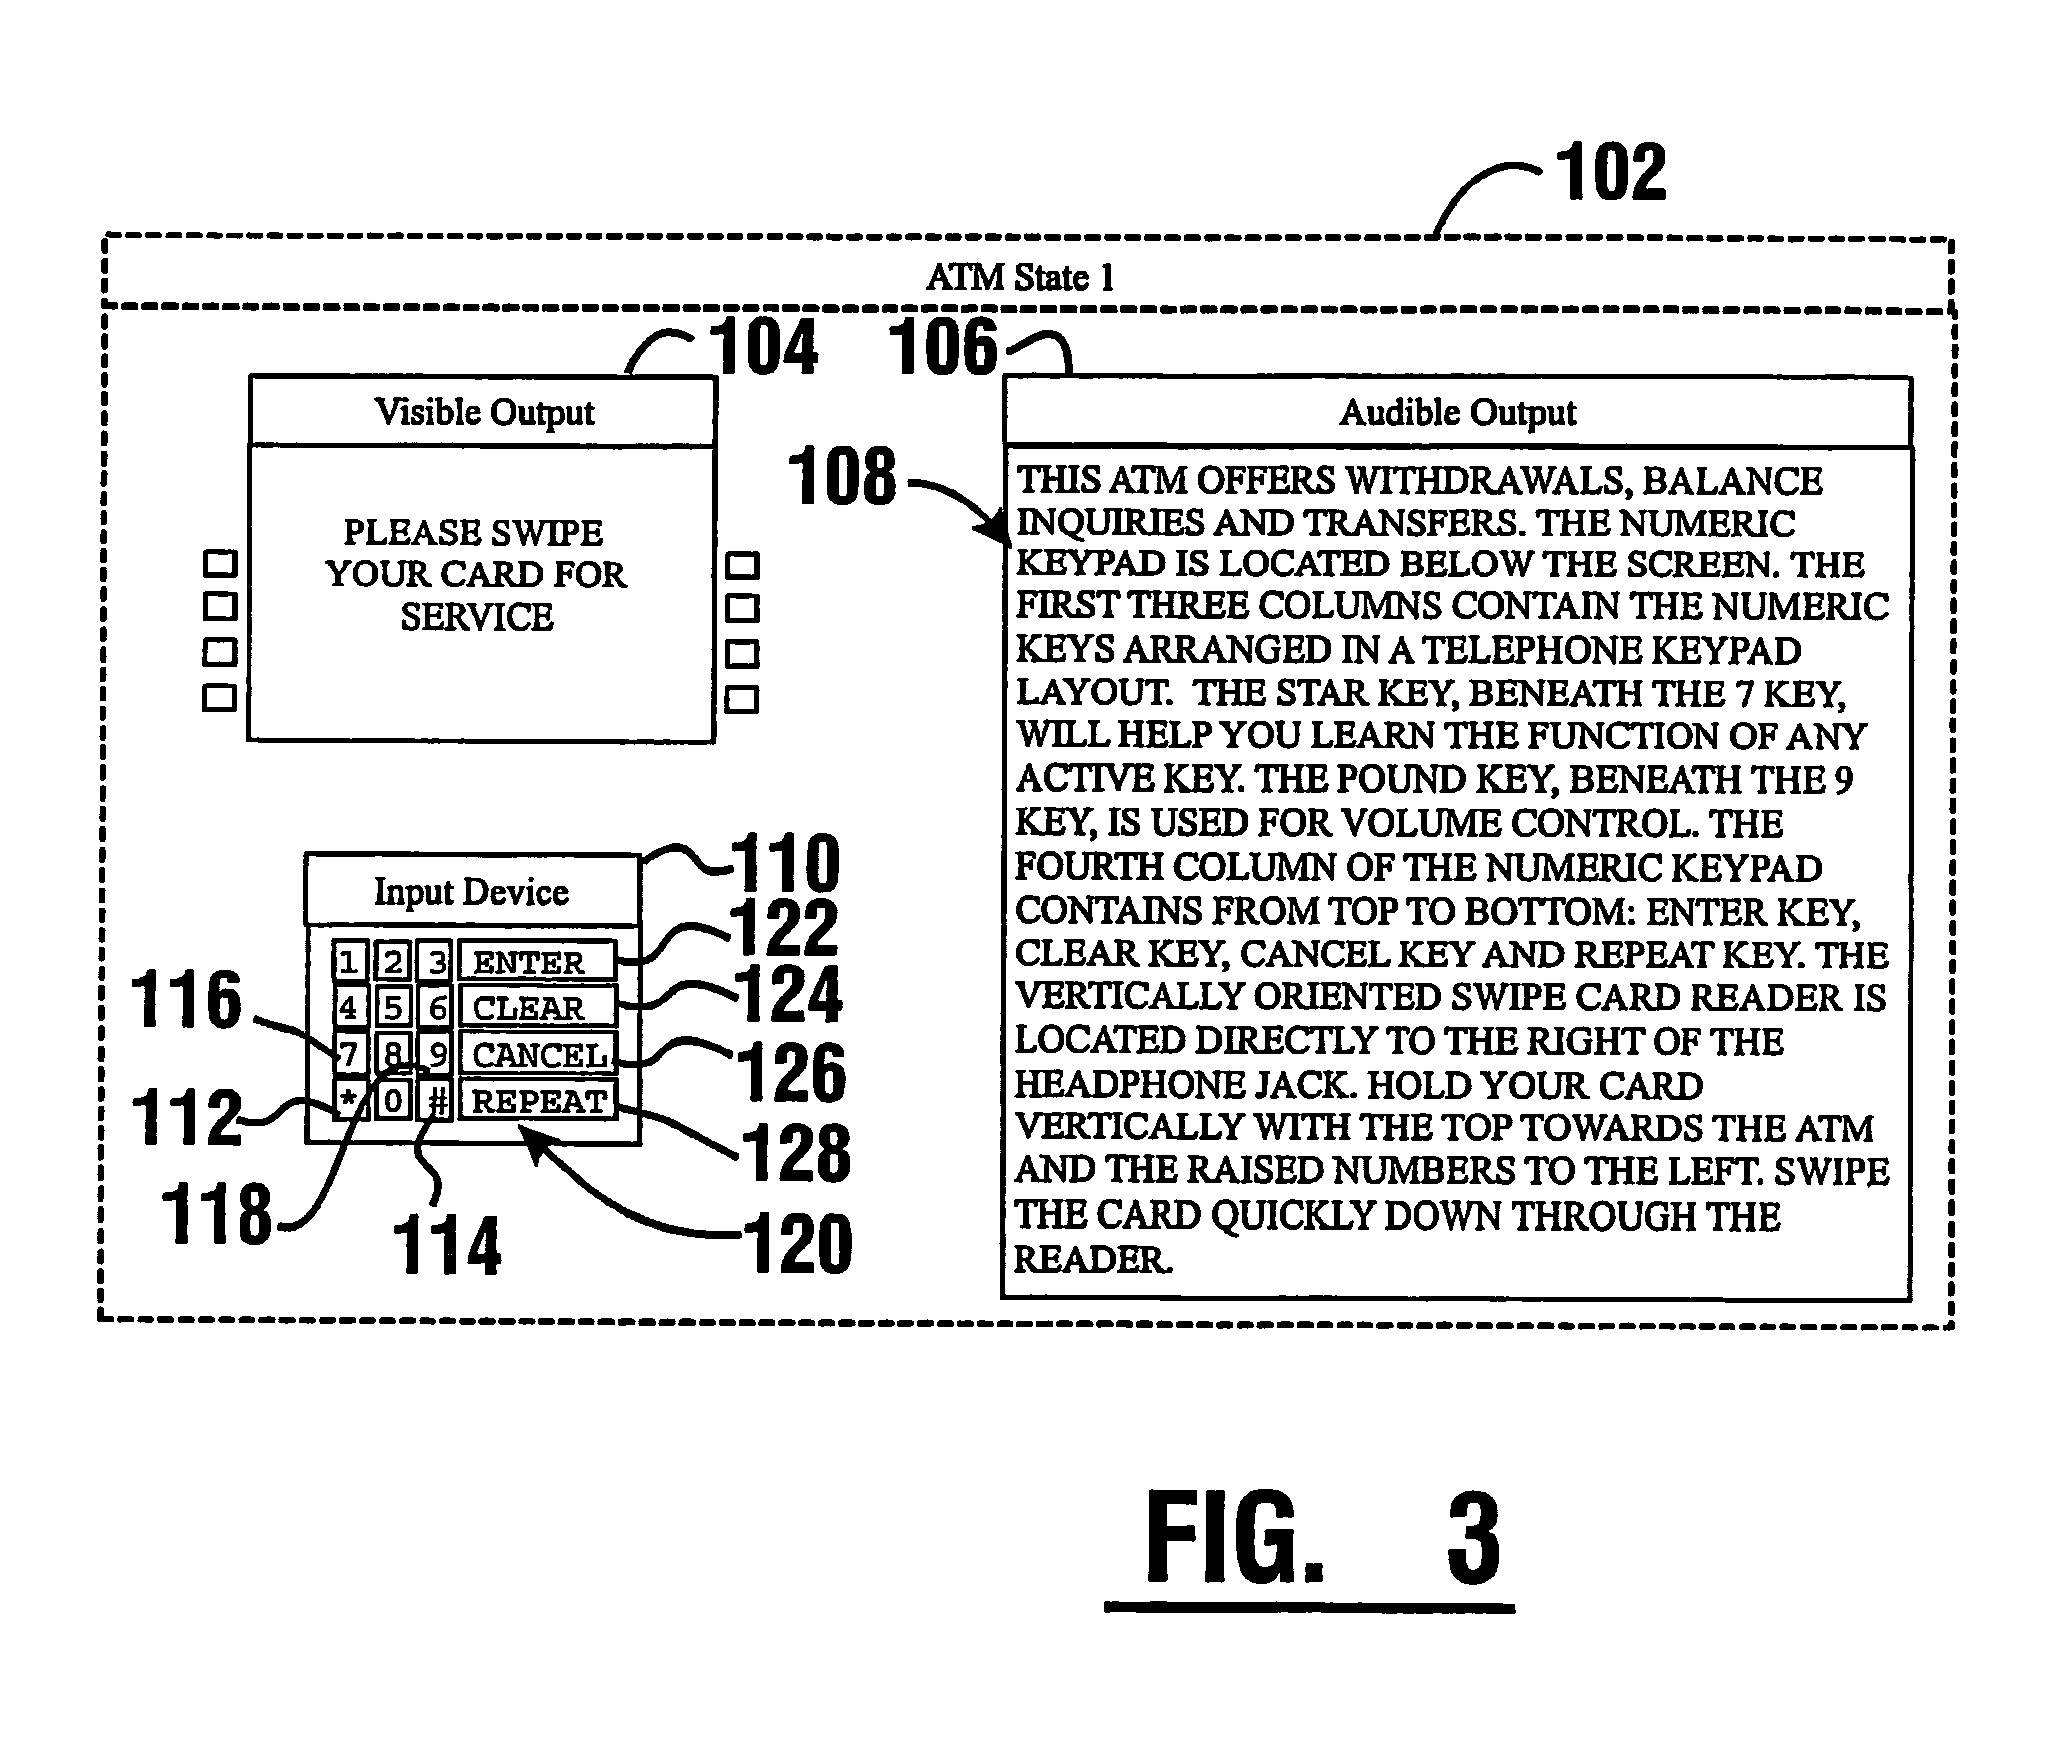 Cash dispensing automated banking machine user interface system and method